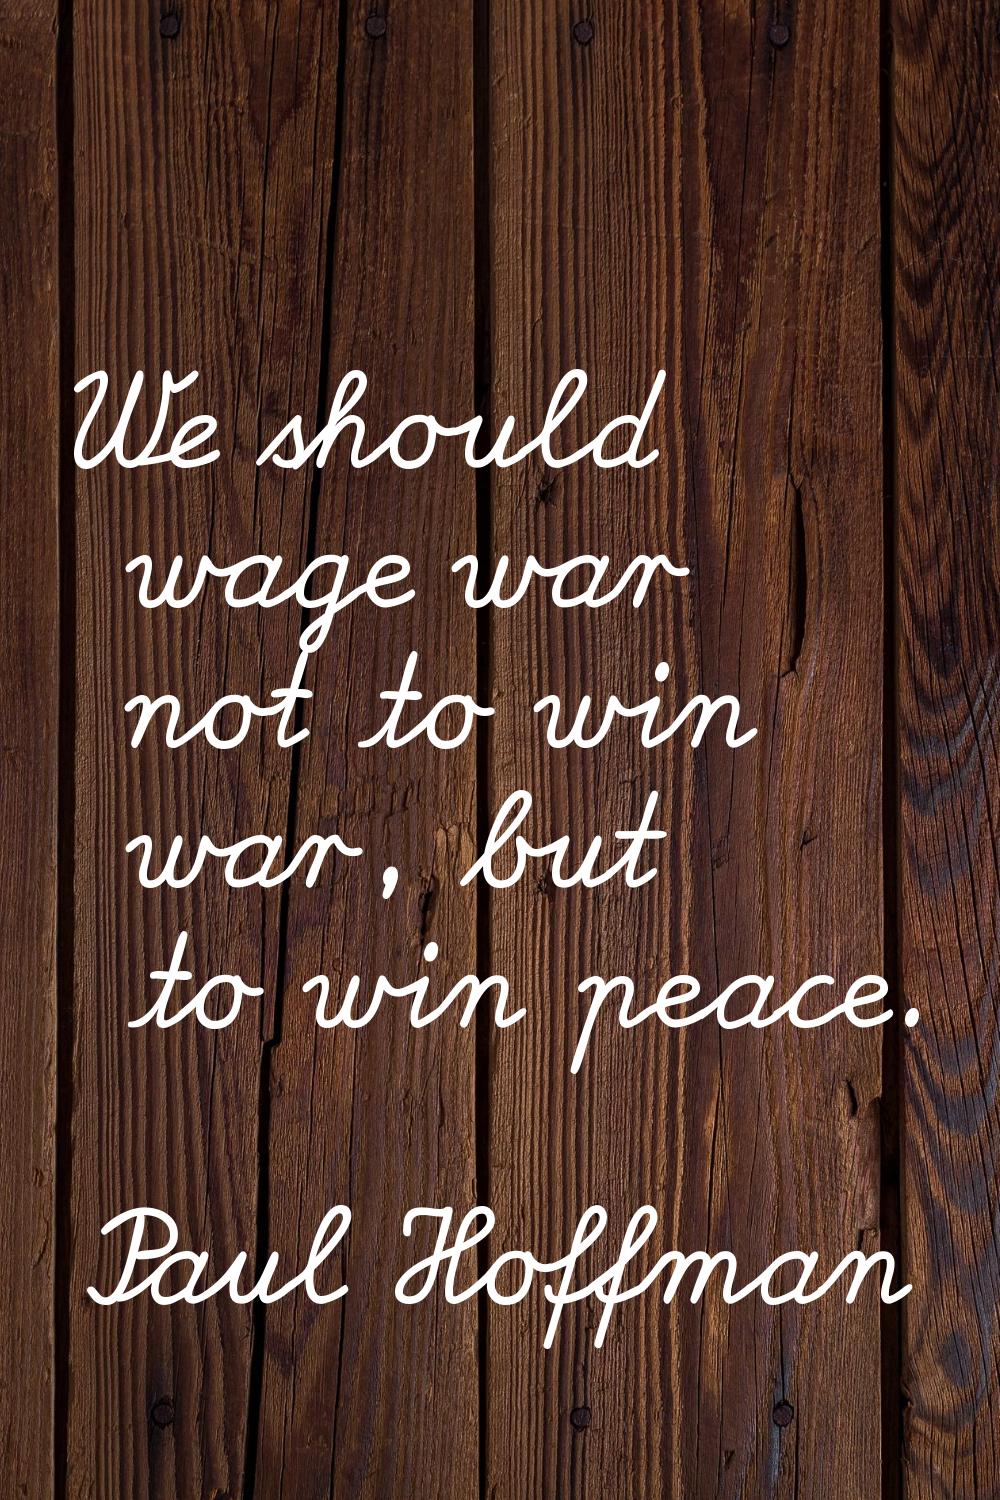 We should wage war not to win war, but to win peace.